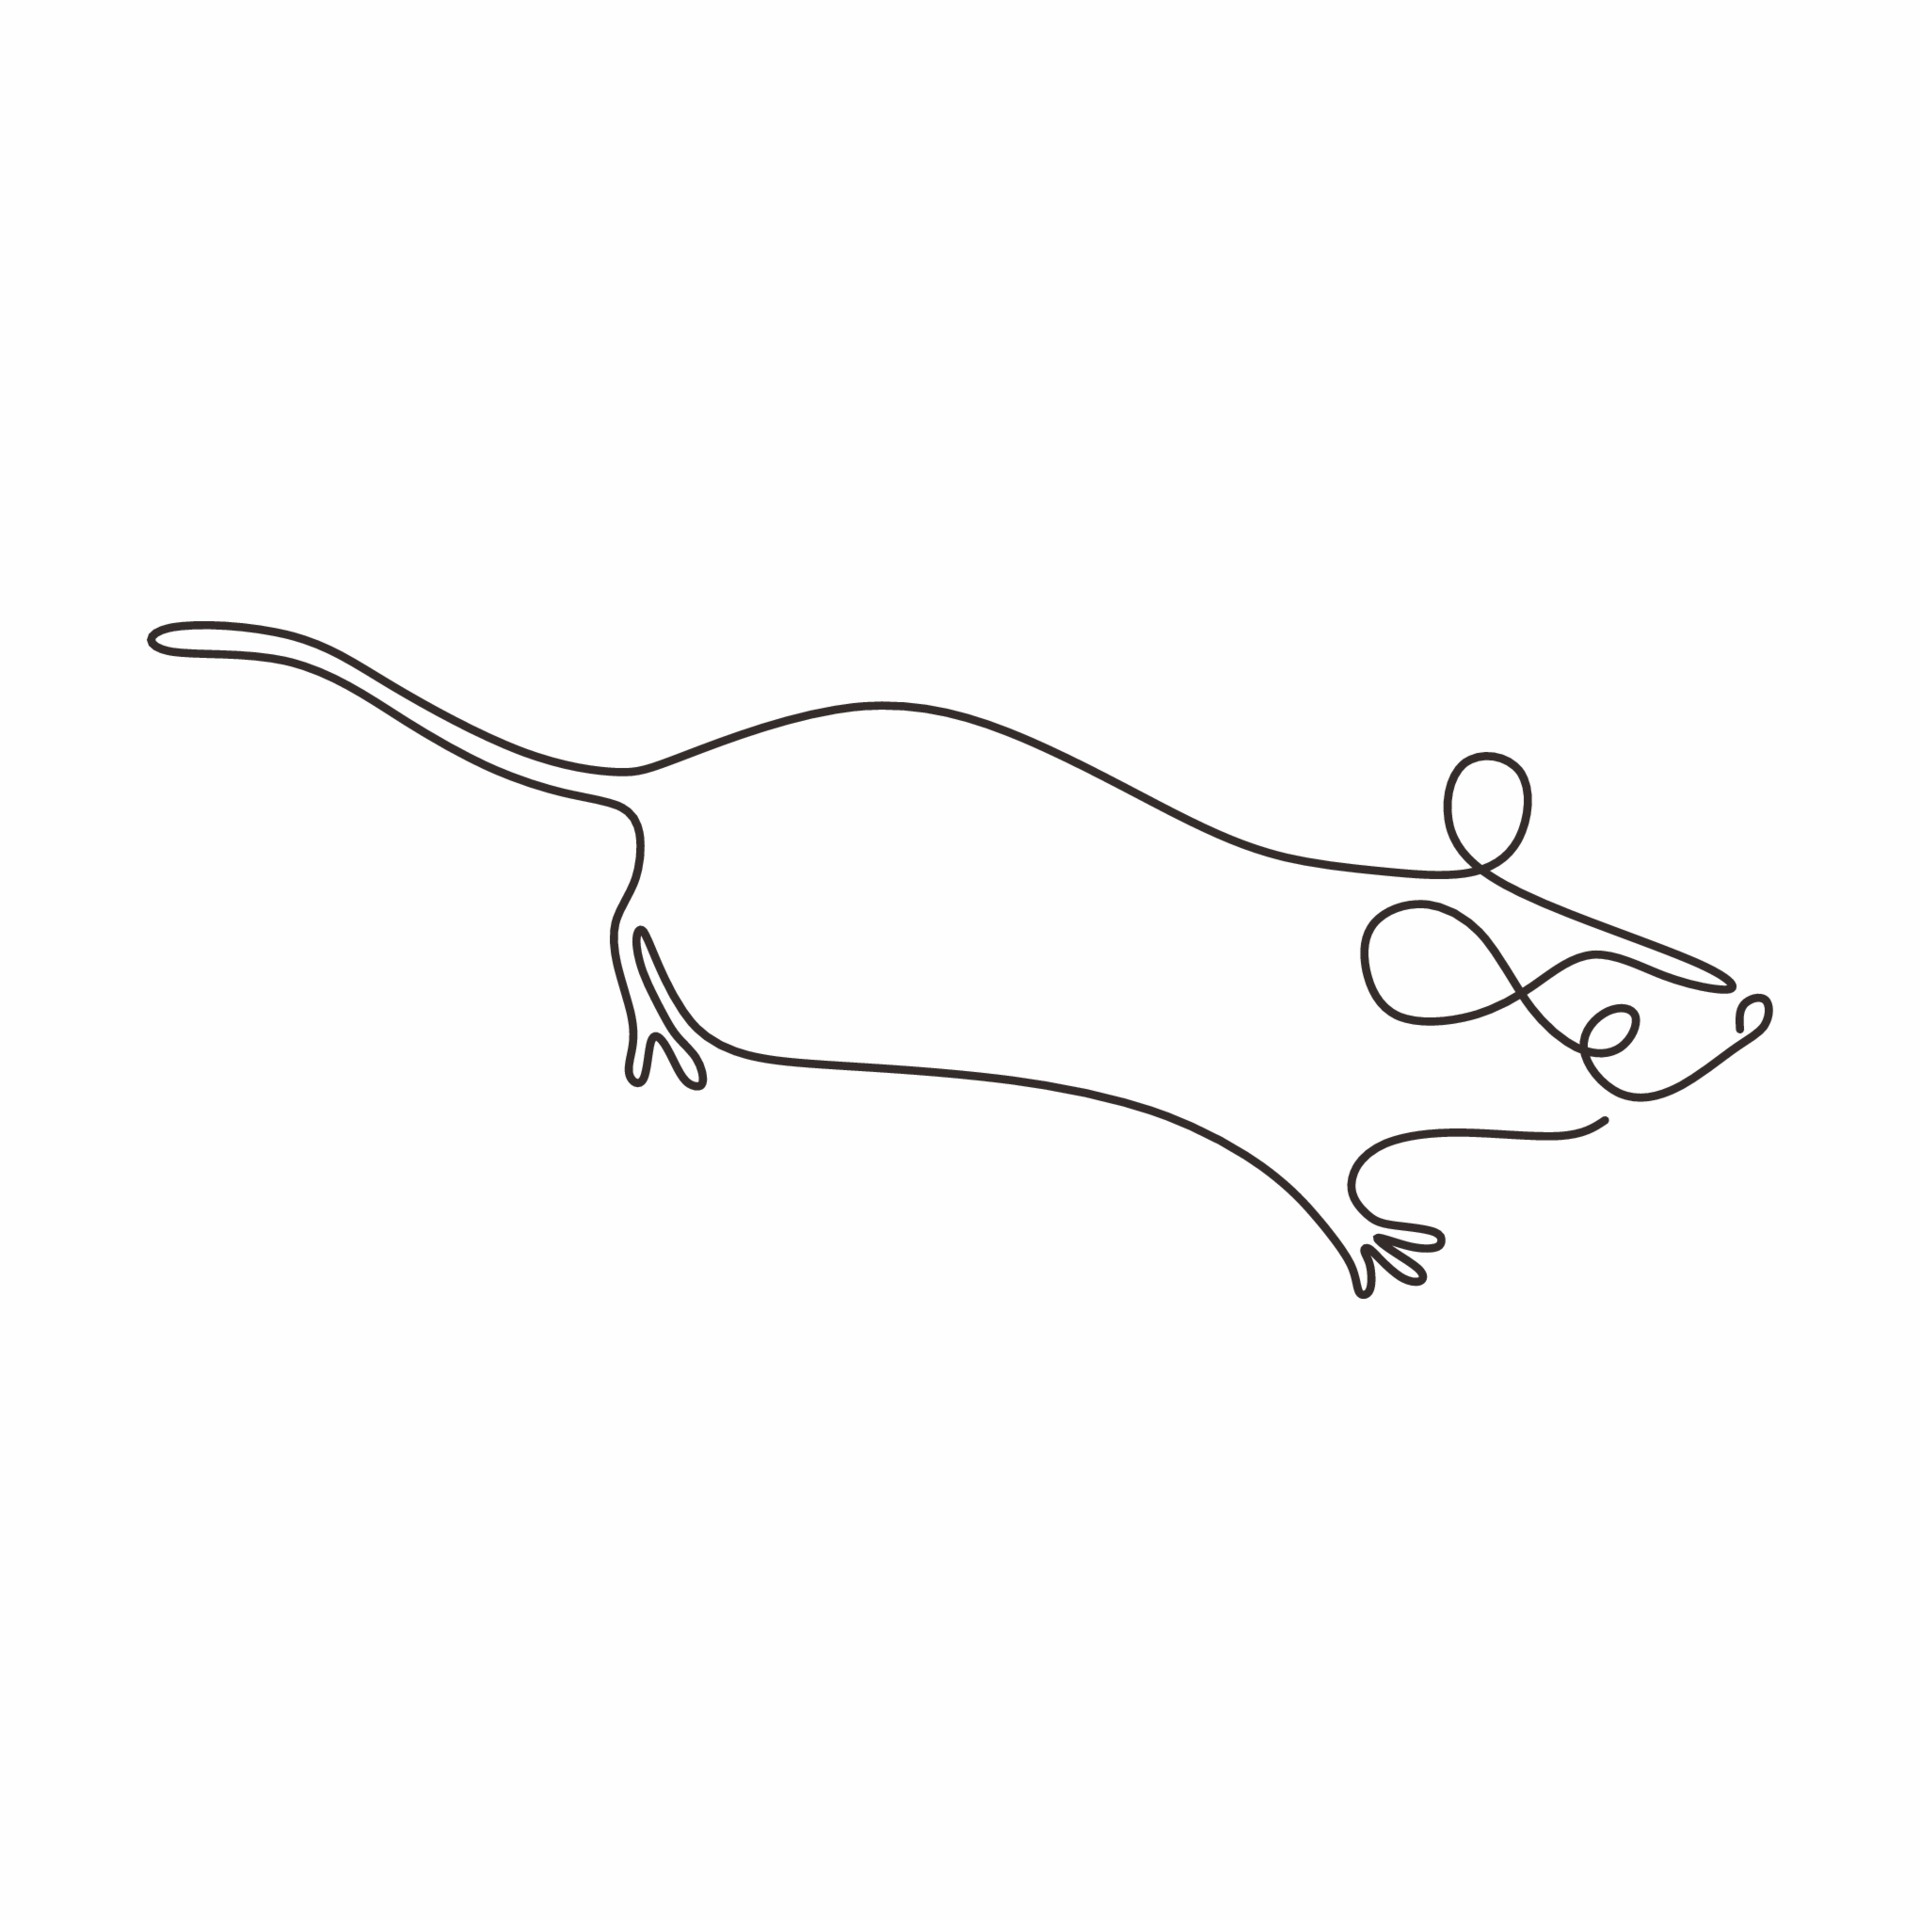 How To Draw A Rat  Drawing  678x600 PNG Download  PNGkit